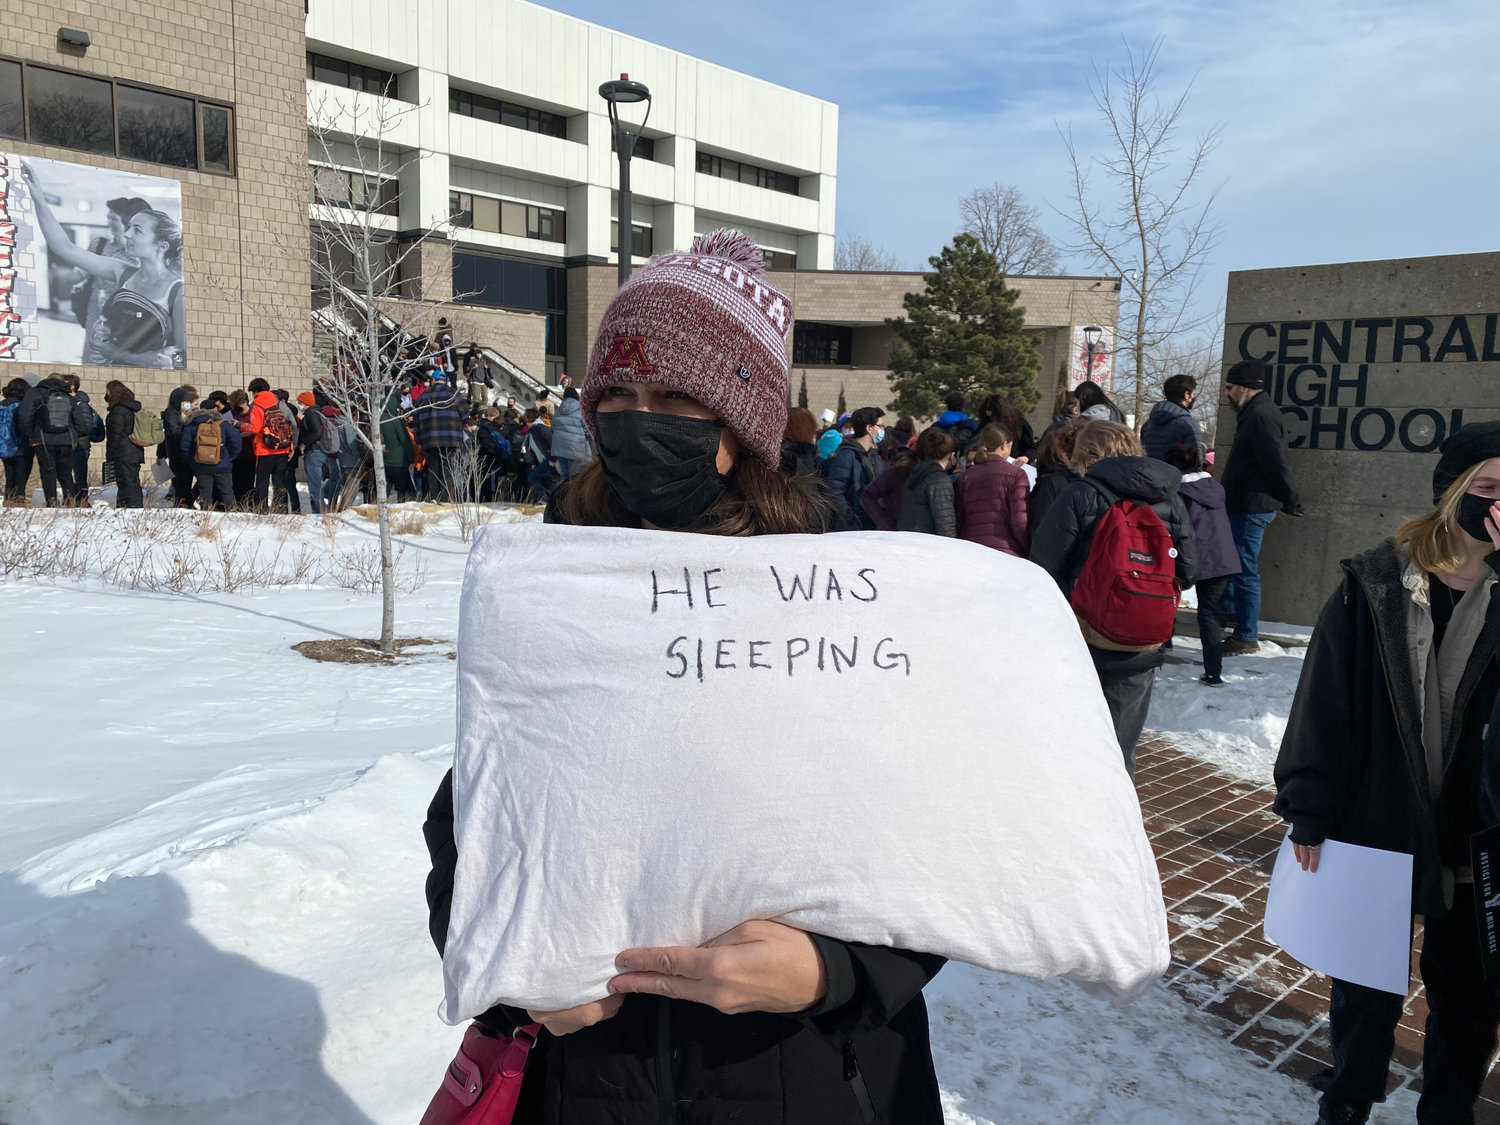 Midway mom of two, Kristine Howatt, held a pillow with the reminder, “He was sleeping” during a rally at Central High School. (Photos by Tesha M. Christensen)